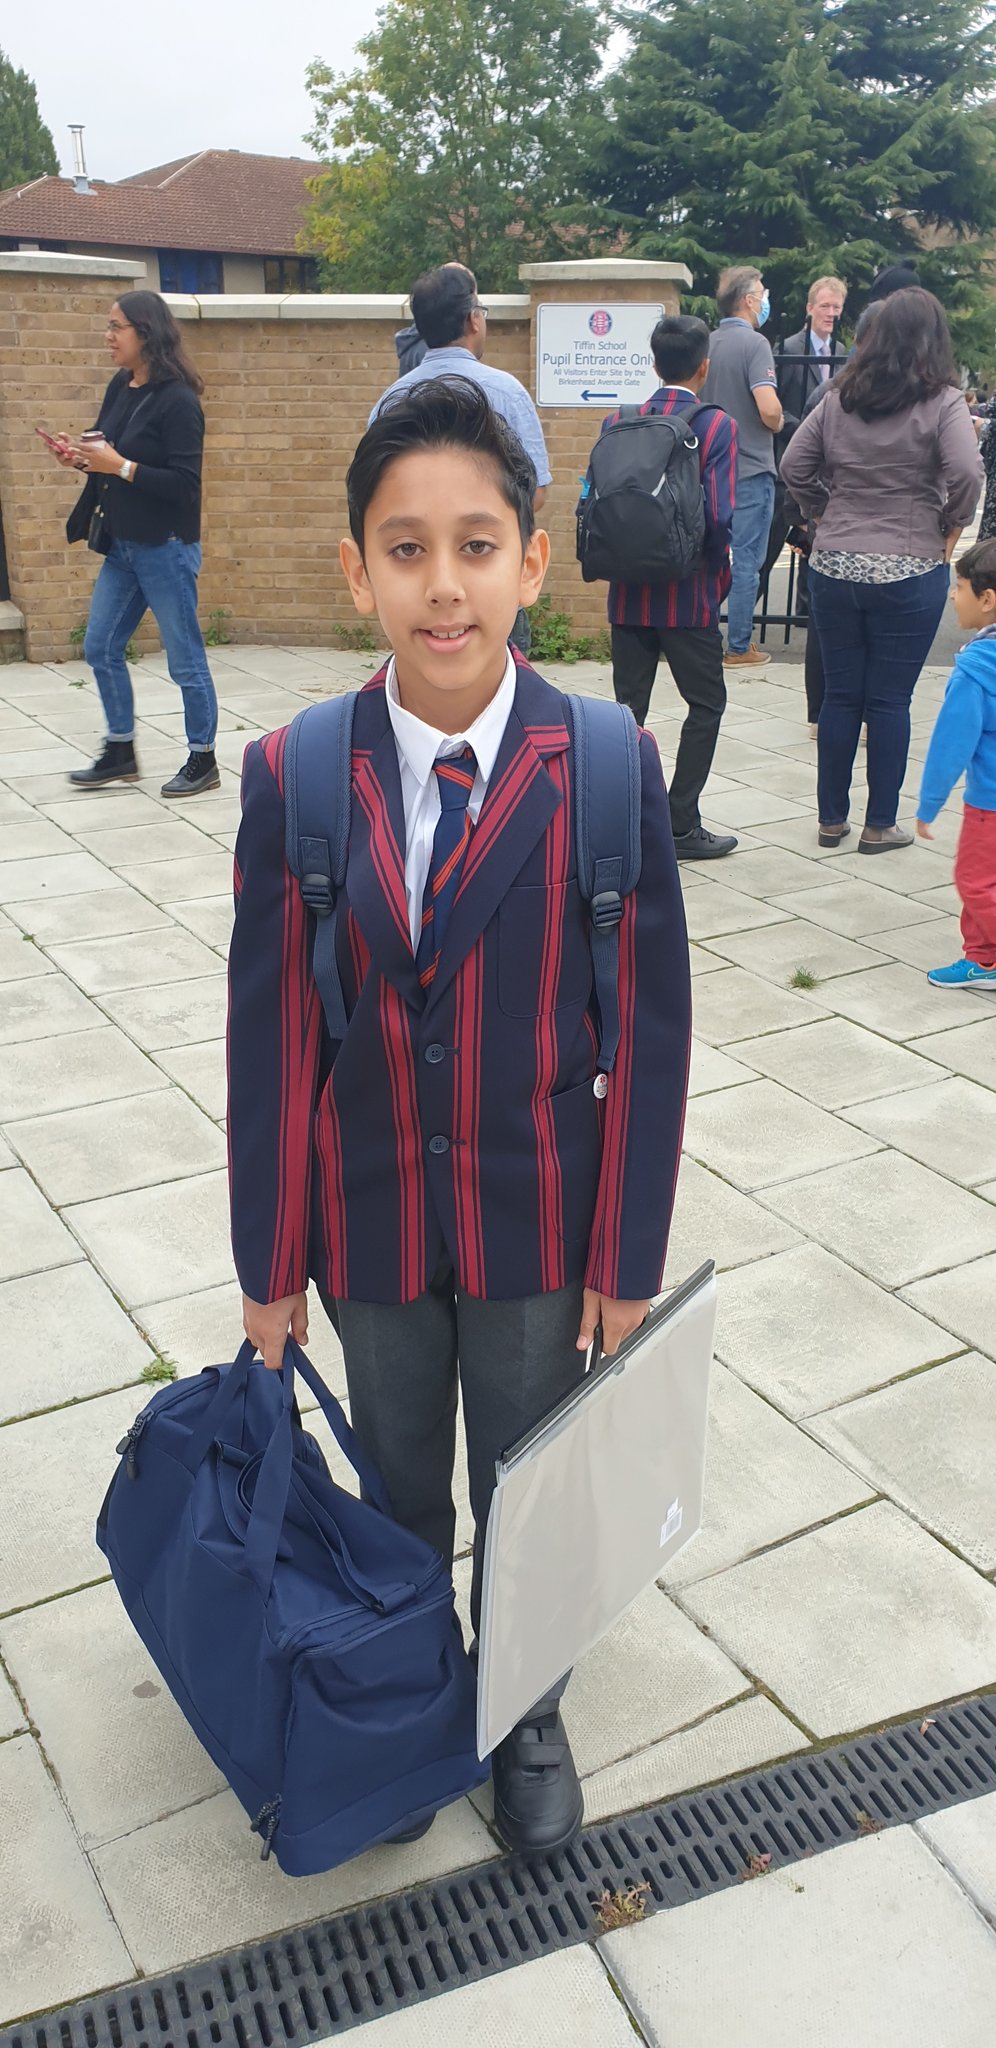 Humillar junio Plantando árboles Jas Patel on Twitter: "Have a fabulous 1st day at big school Son! 👨‍🎓 You  are the kindest, most resilient &amp; smartest person I know! I could not  be more glad that